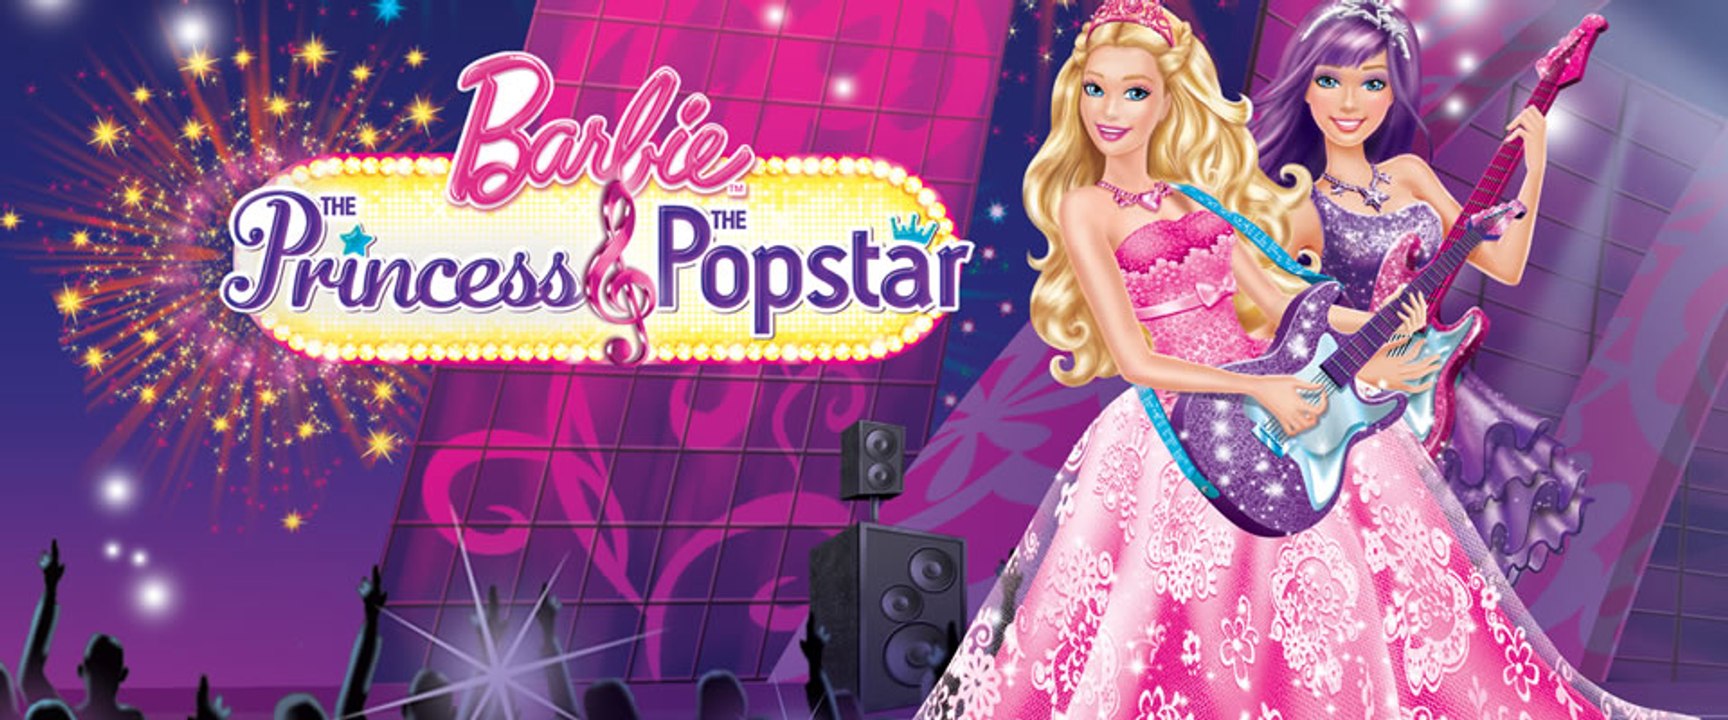 Barbie The Princess & the Popstar by Baby Land | Barbie Collection -  Dailymotion